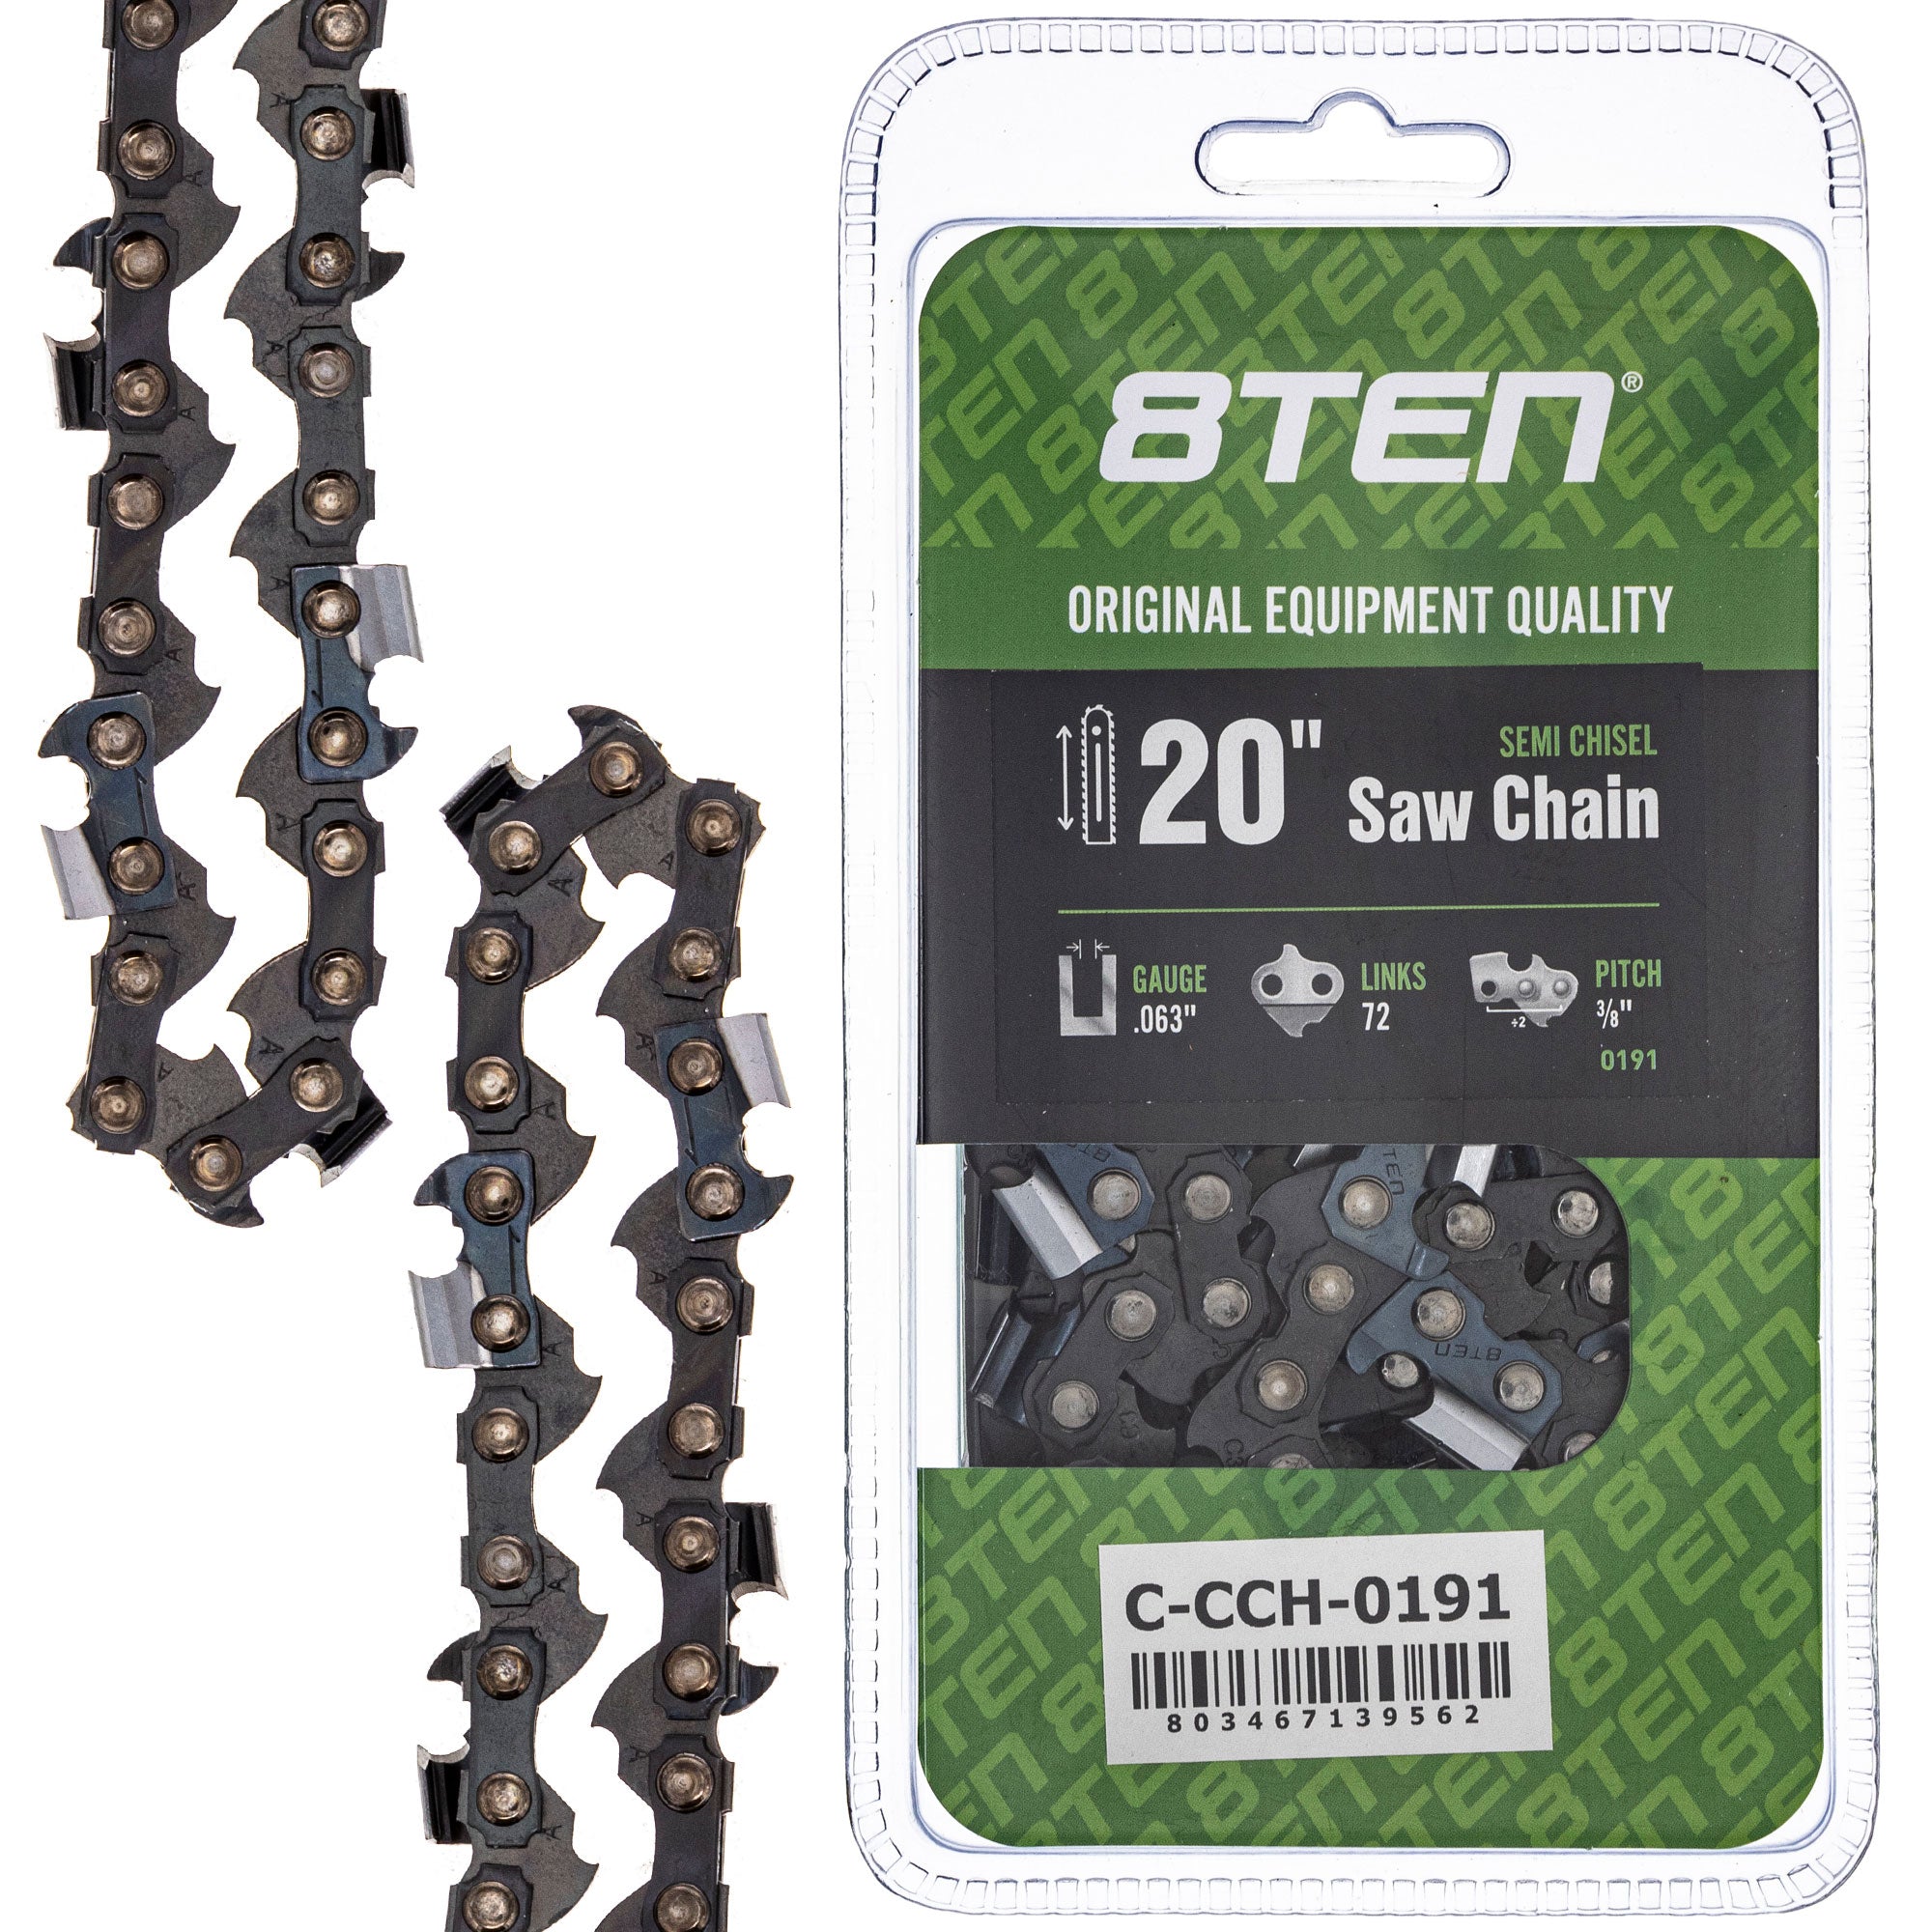 8TEN MK1010435 Guide Bar & Chain for MSE MS E 066